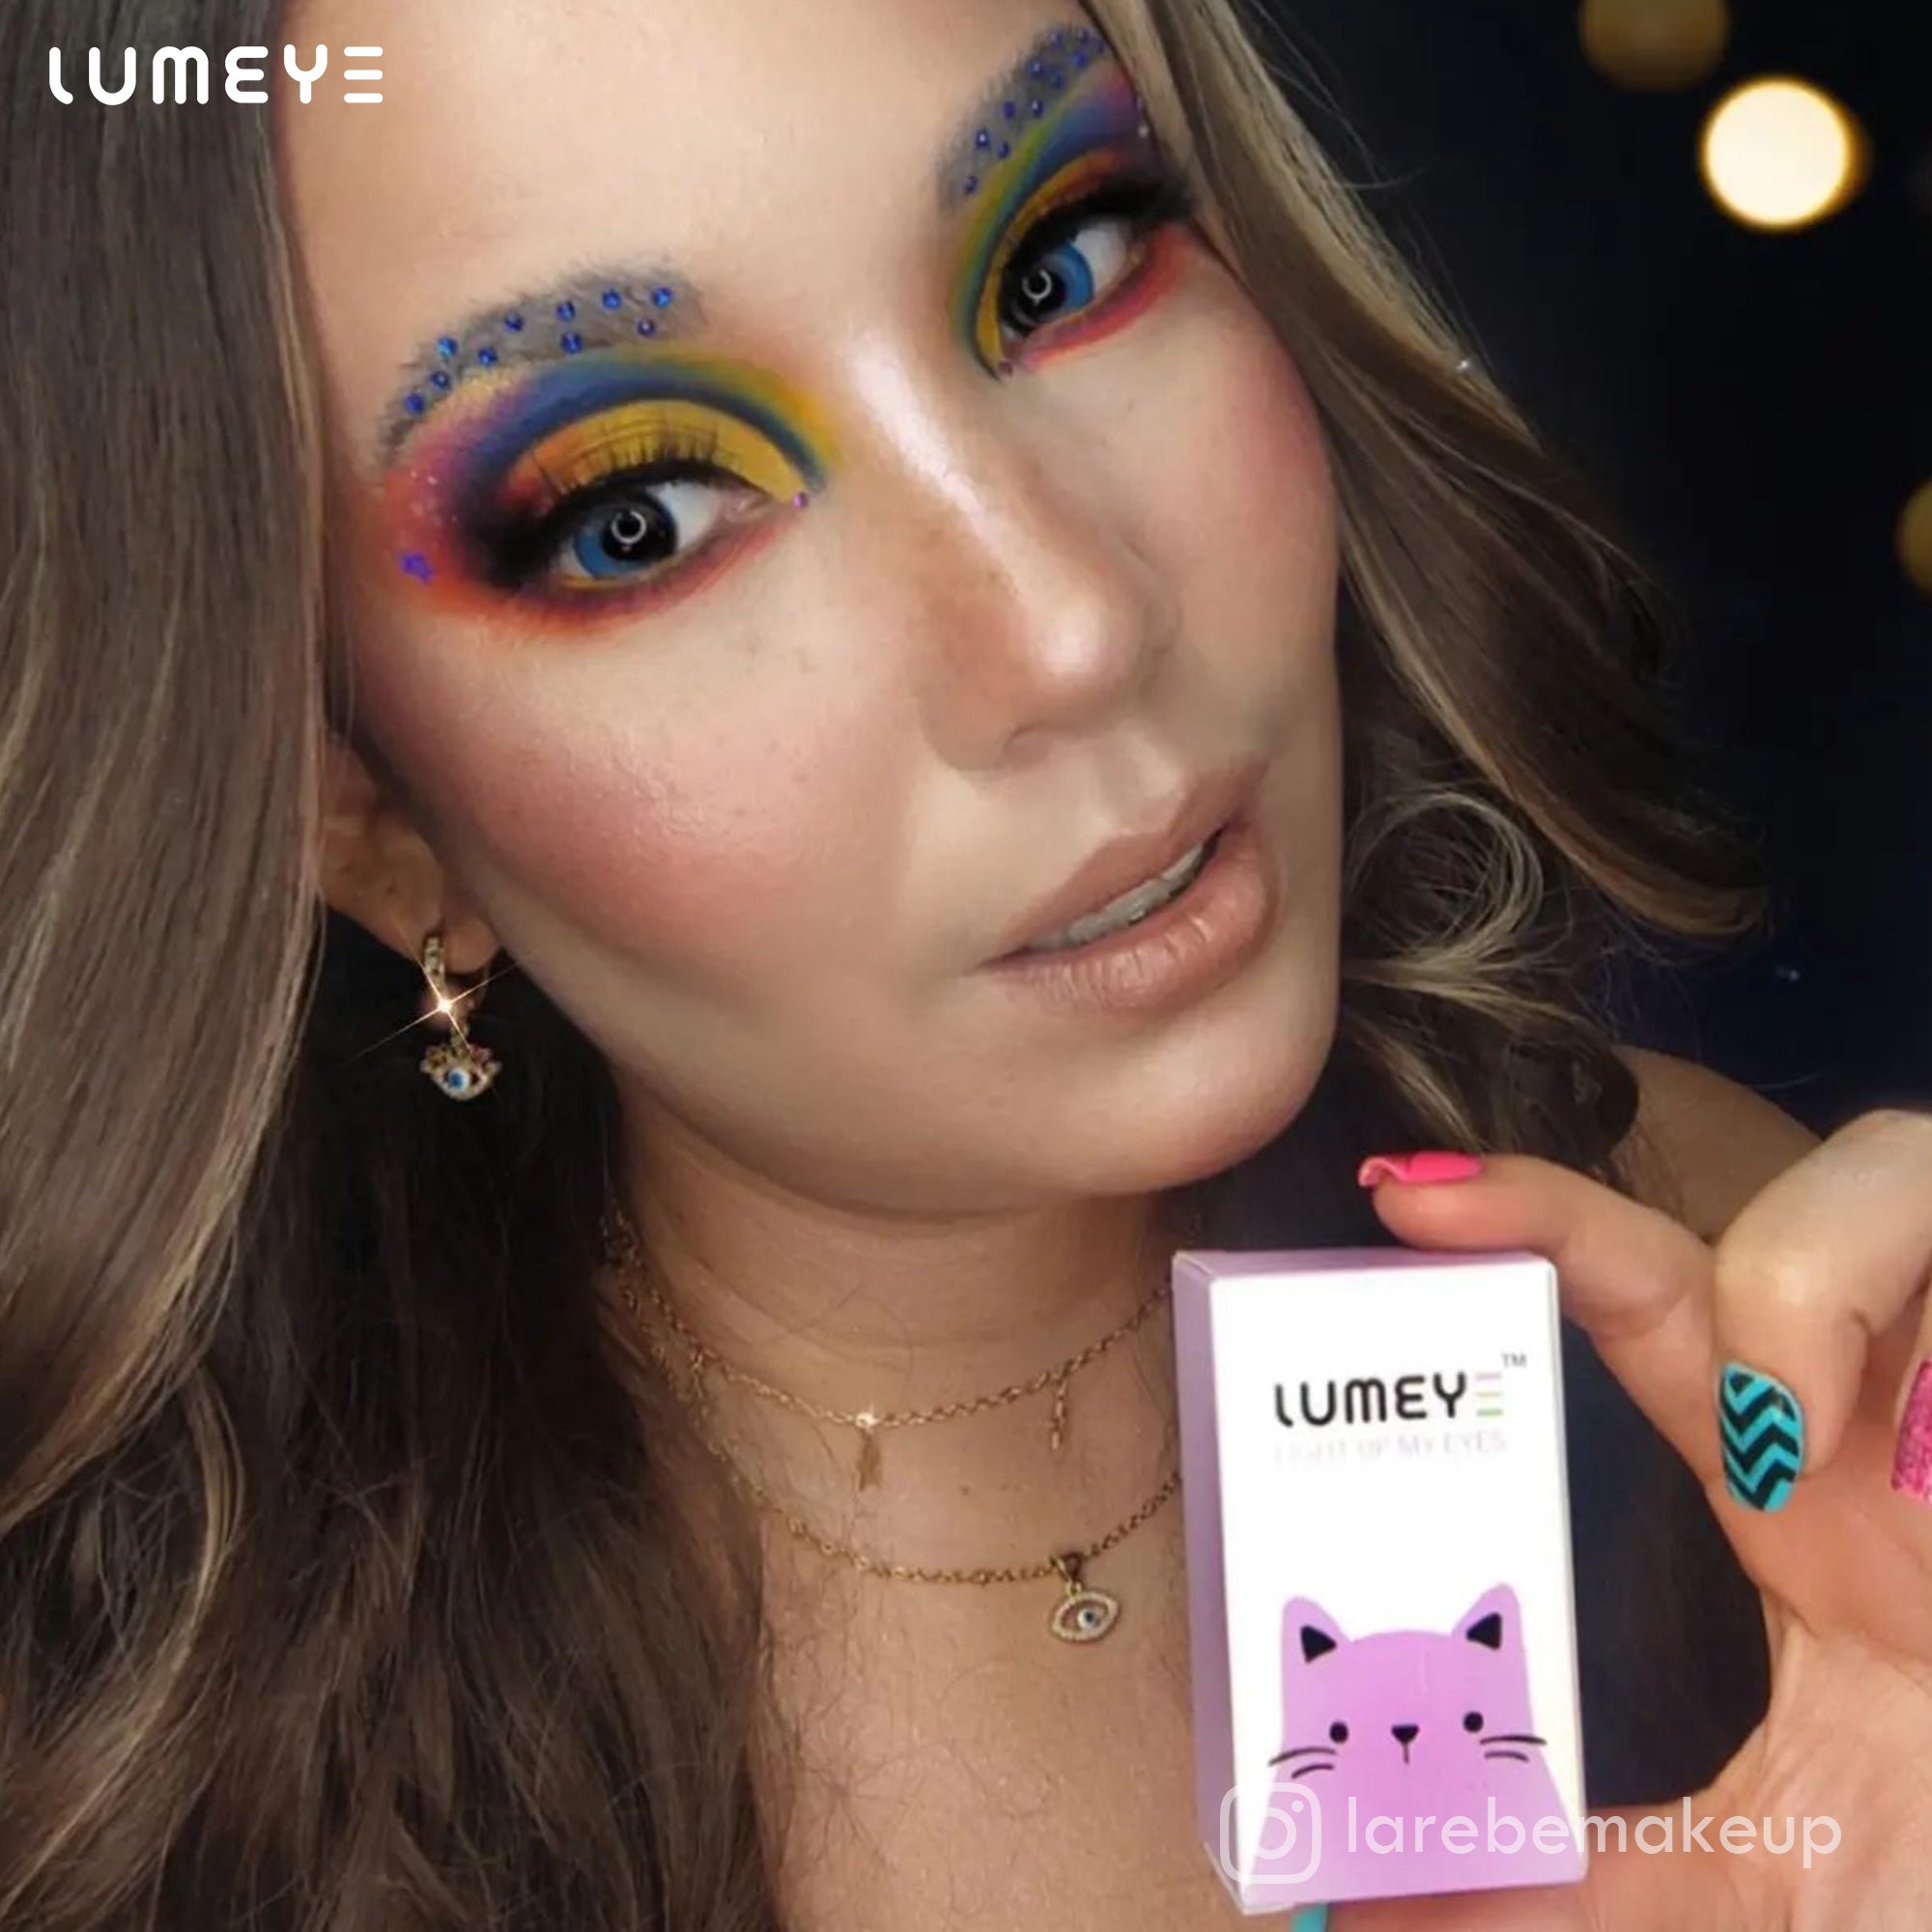 Best COLORED CONTACTS - LUMEYE Fairy Swamp Blue Colored Contact Lenses - LUMEYE